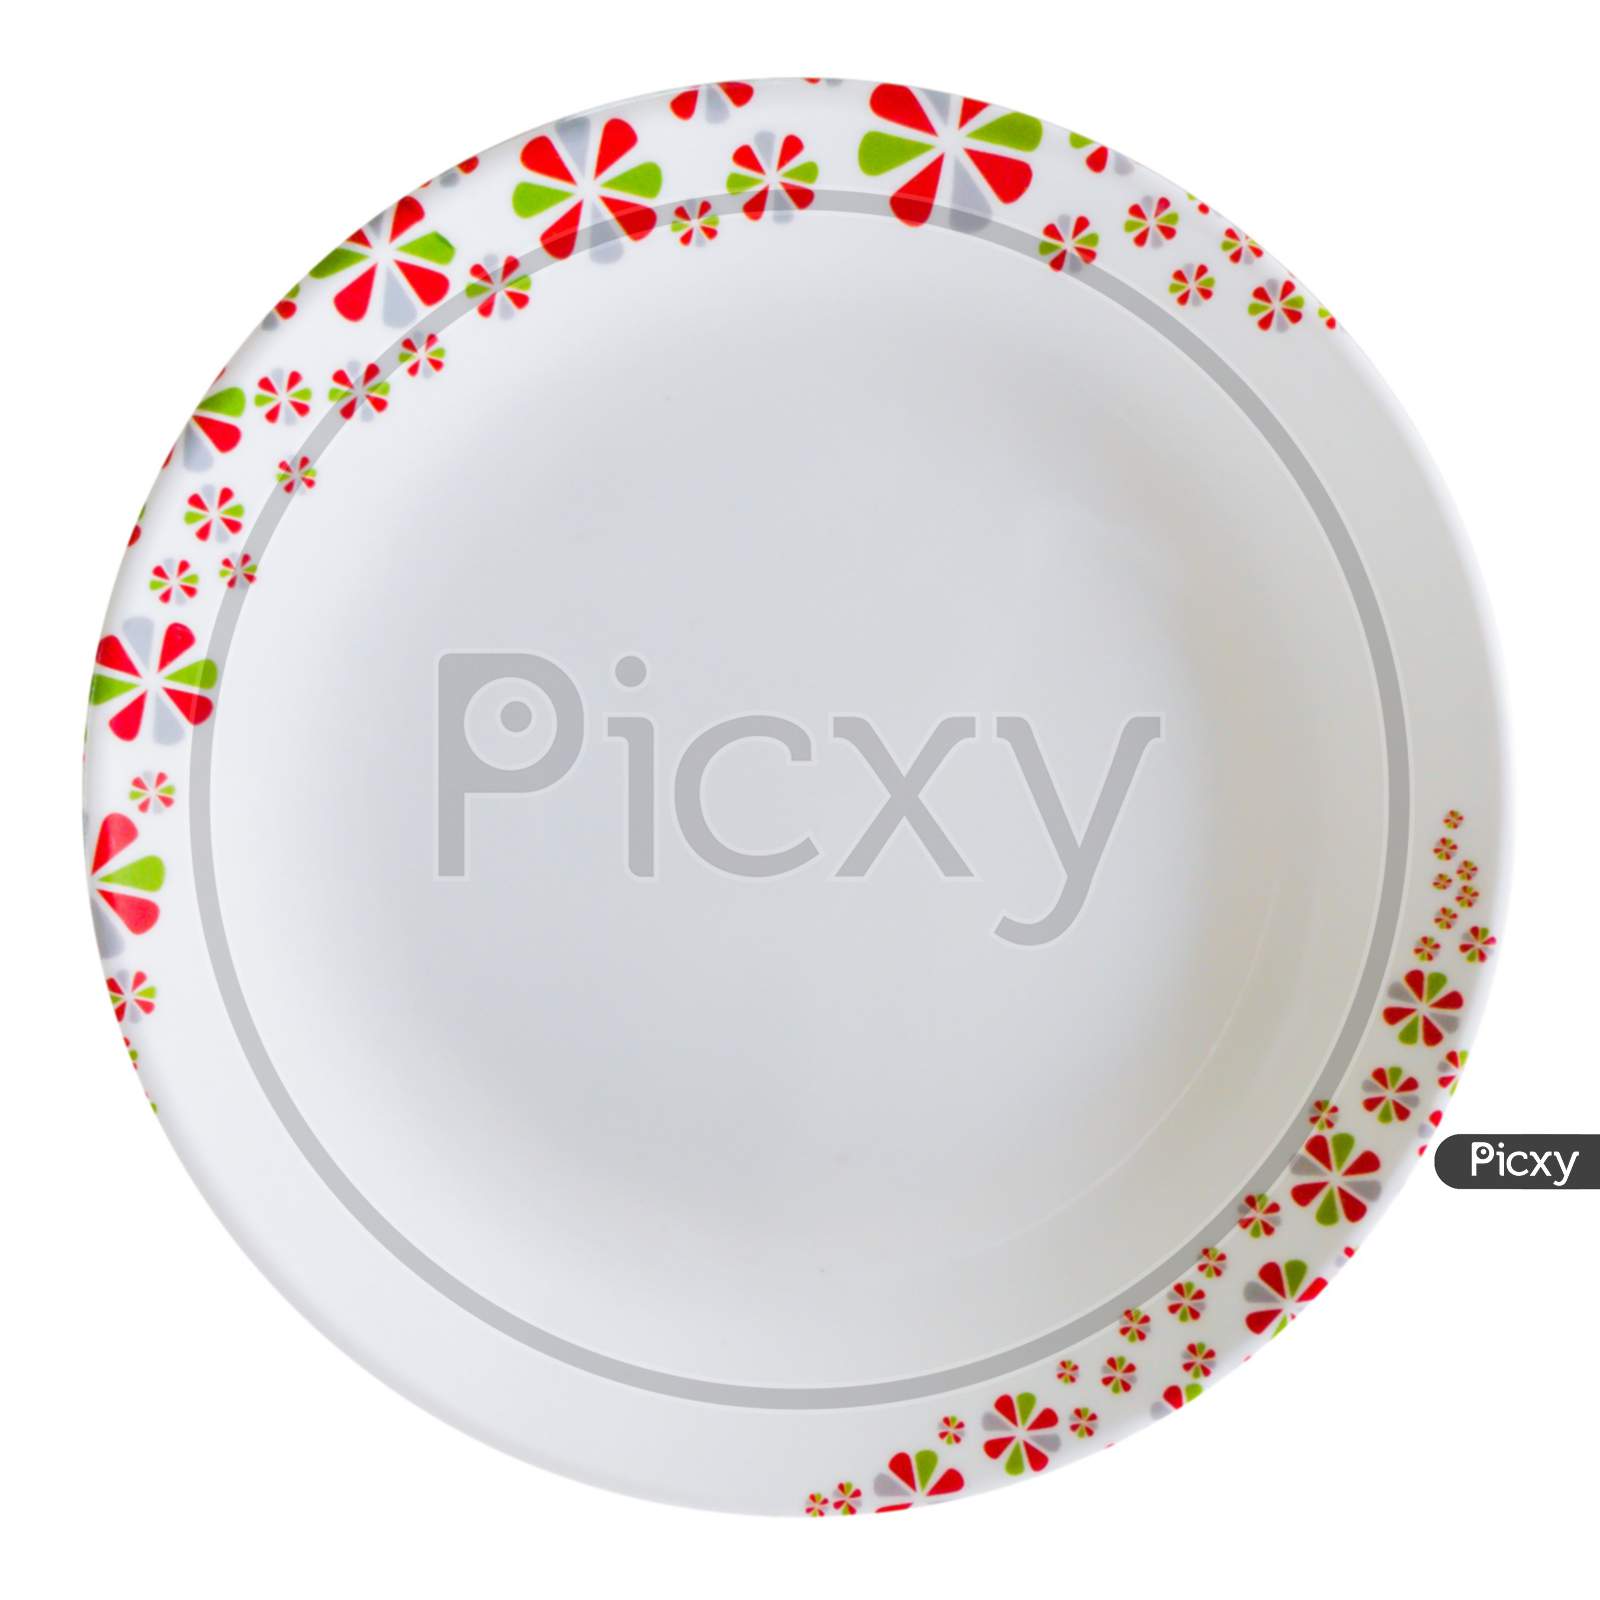 White and colourful crockery plate